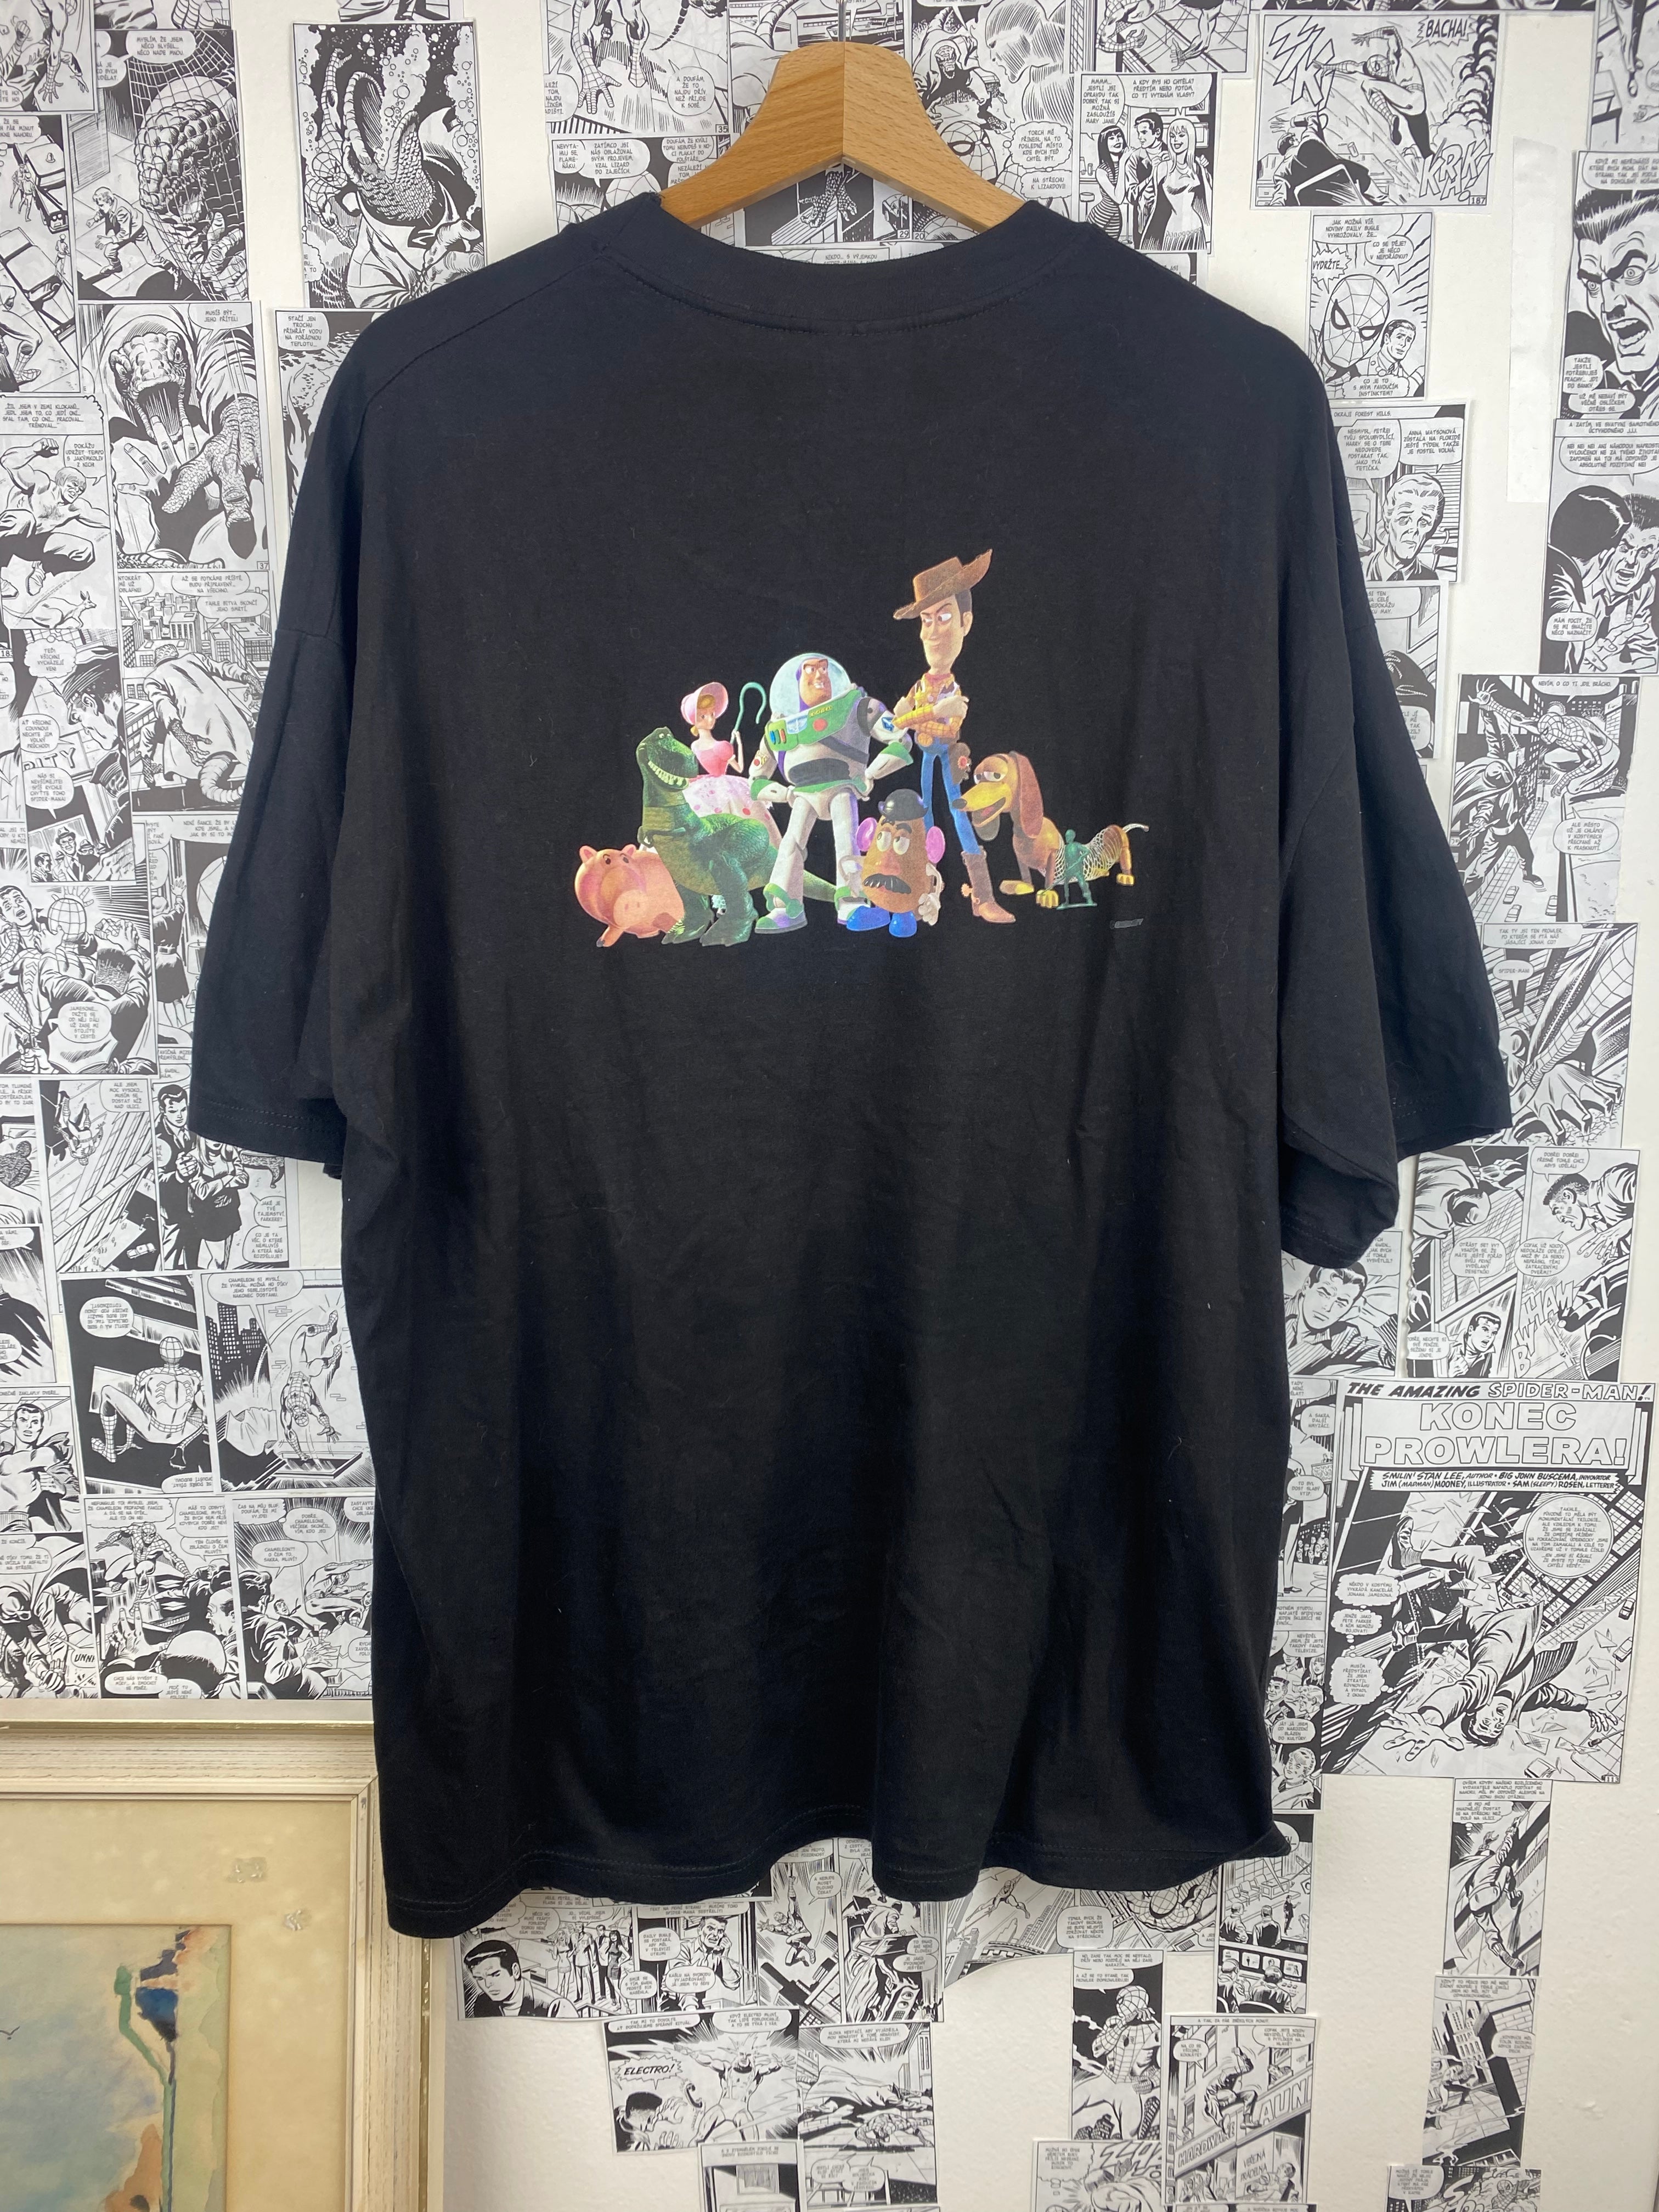 Vintage Toy Story 90s t-shirt - size XL